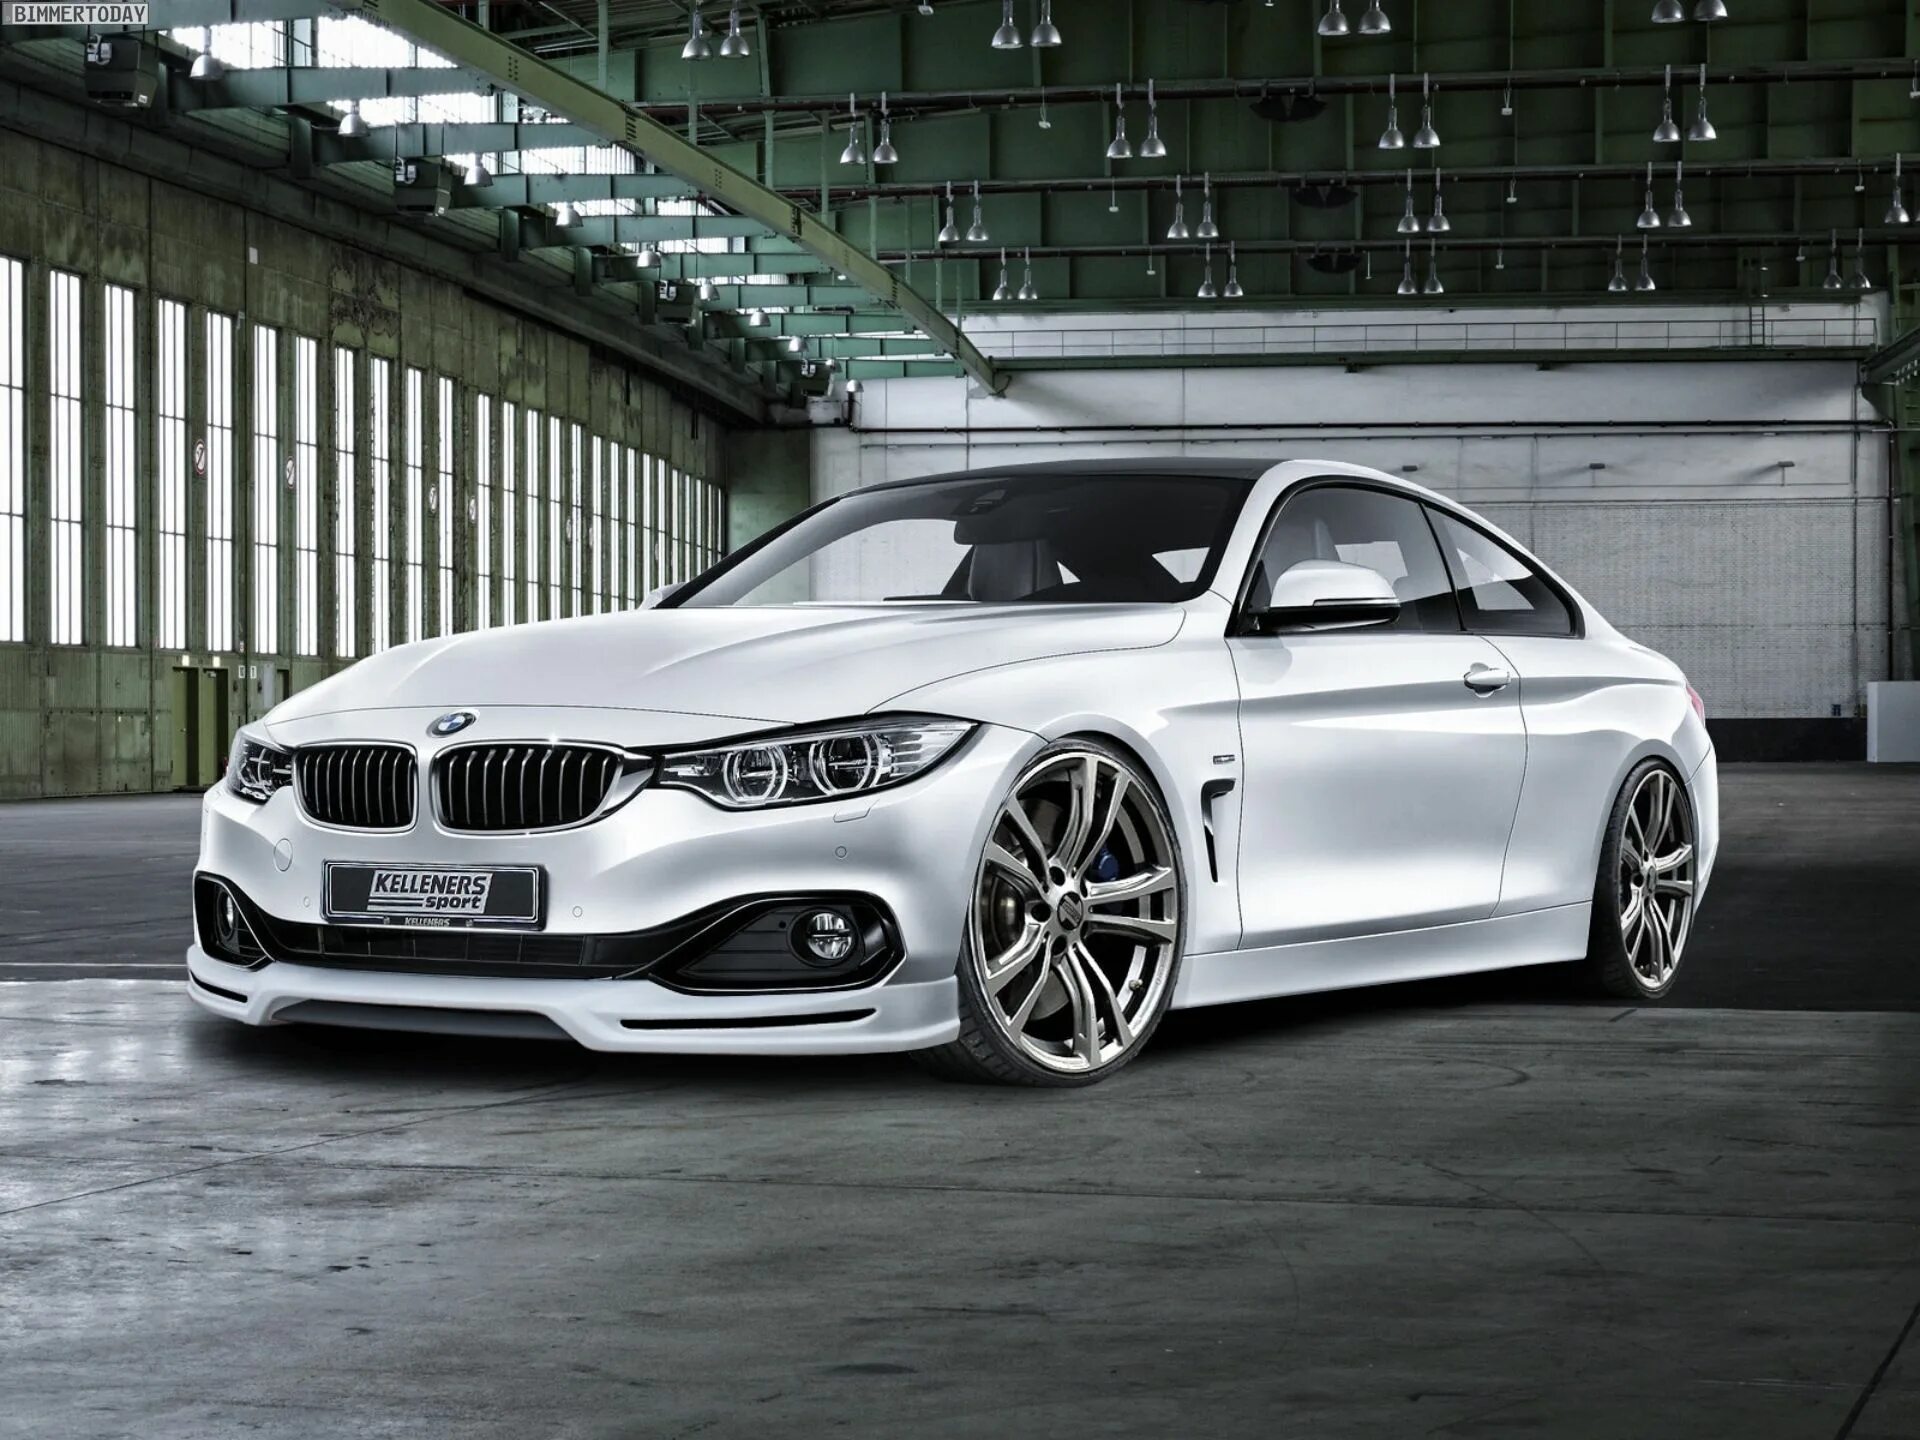 BMW 4 Series f32. BMW 4 Coupe Tuning. BMW m4 f32. BMW m4 Coupe. F 33 10